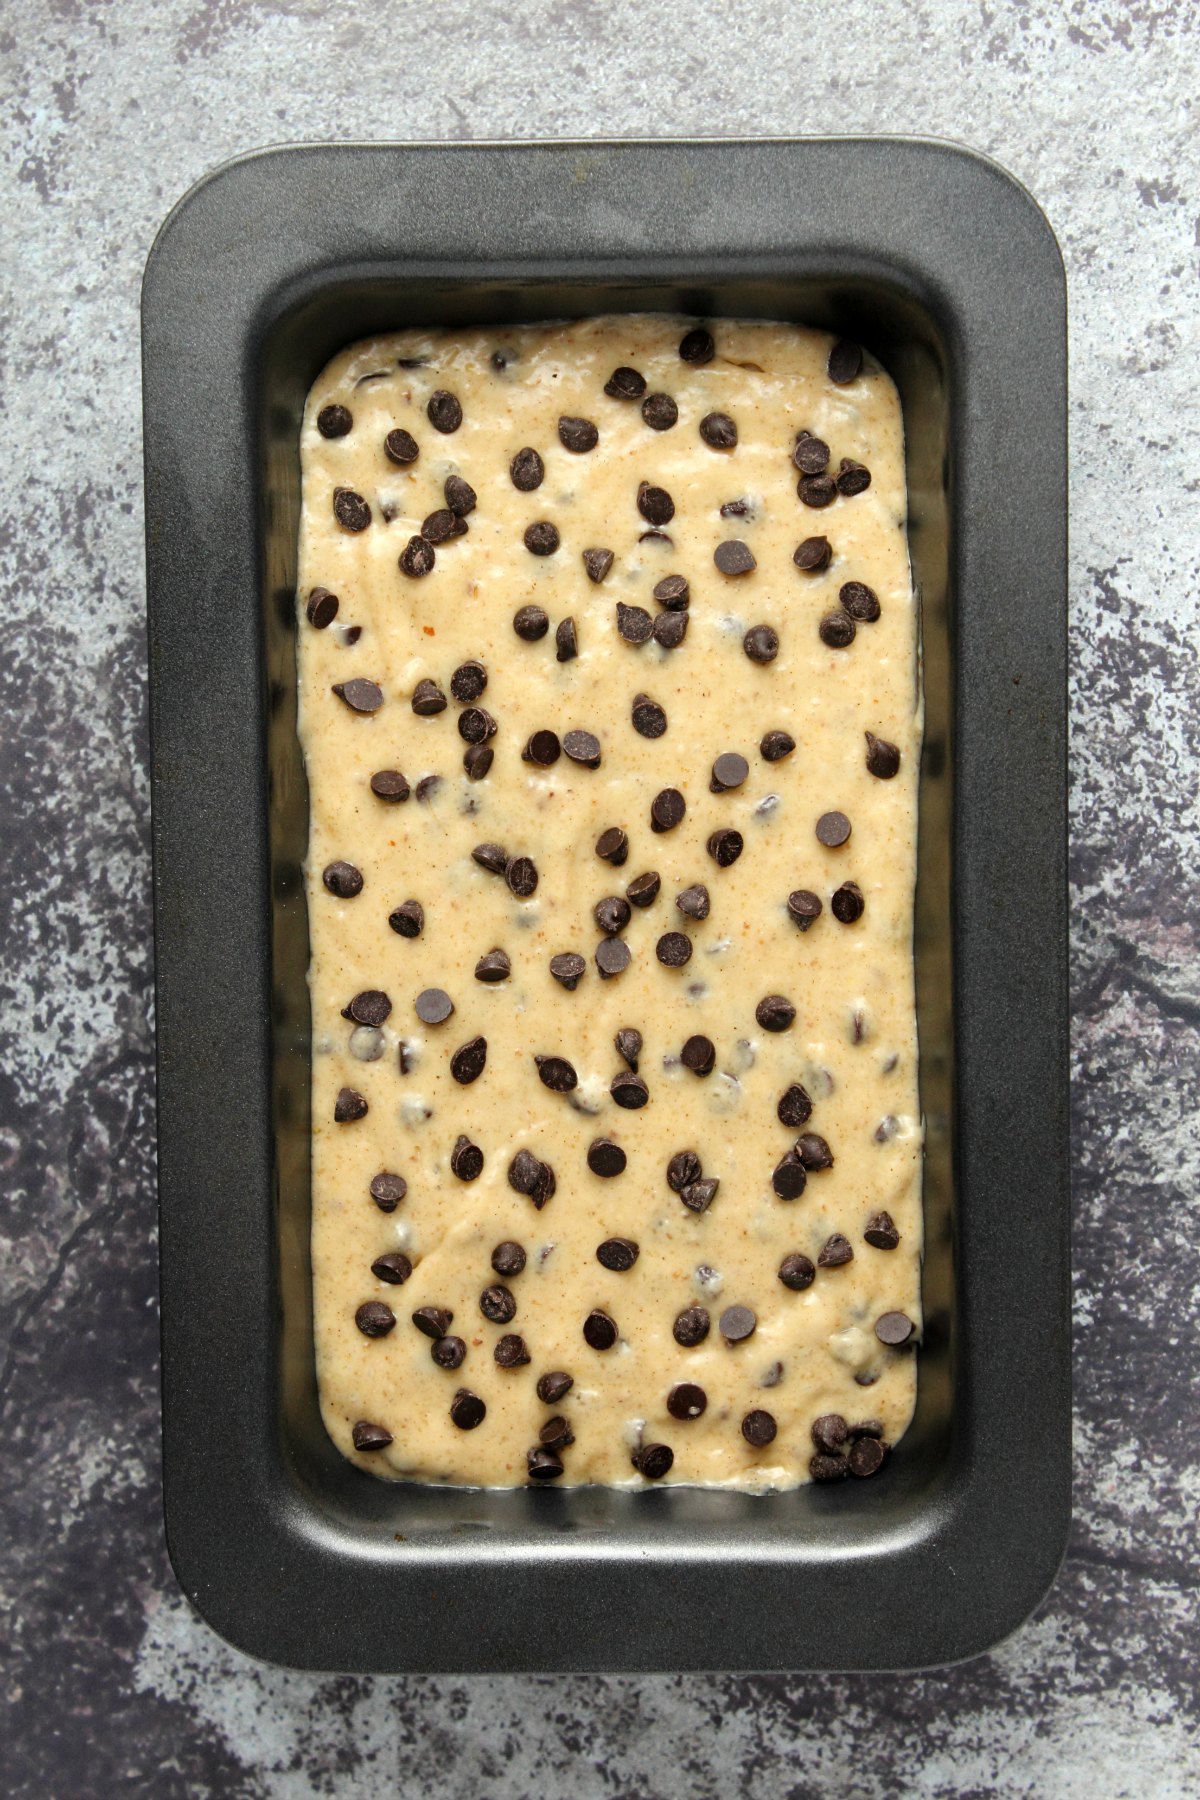 Vegan chocolate chip banana bread batter in a loaf pan ready to bake.